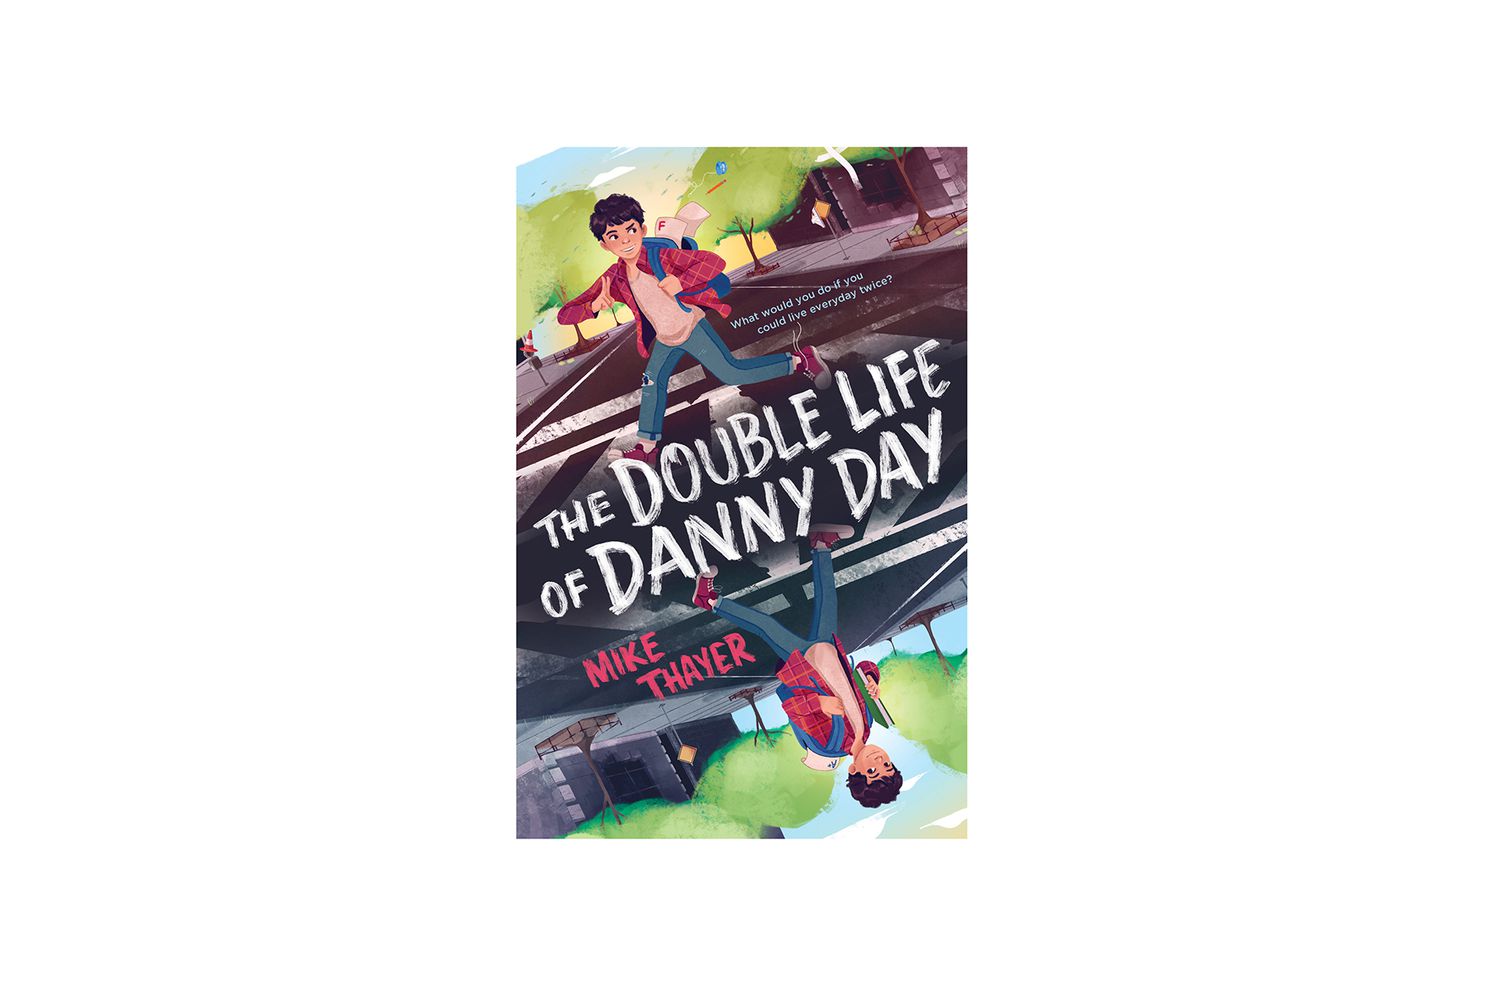 The Double Life of Danny Day